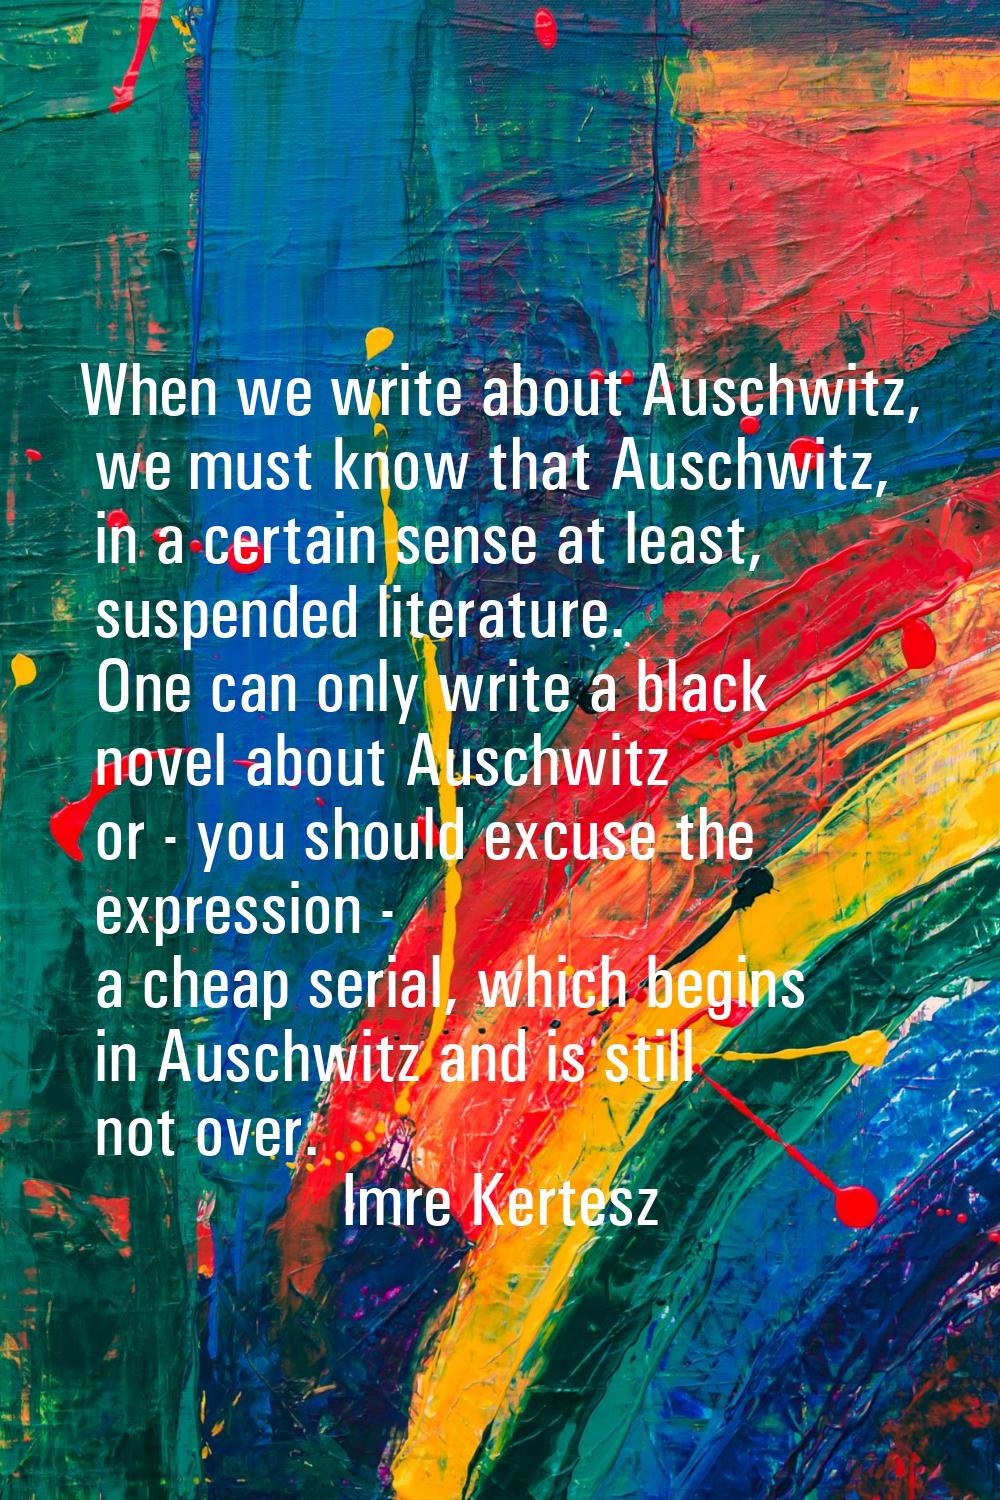 When we write about Auschwitz, we must know that Auschwitz, in a certain sense at least, suspended 